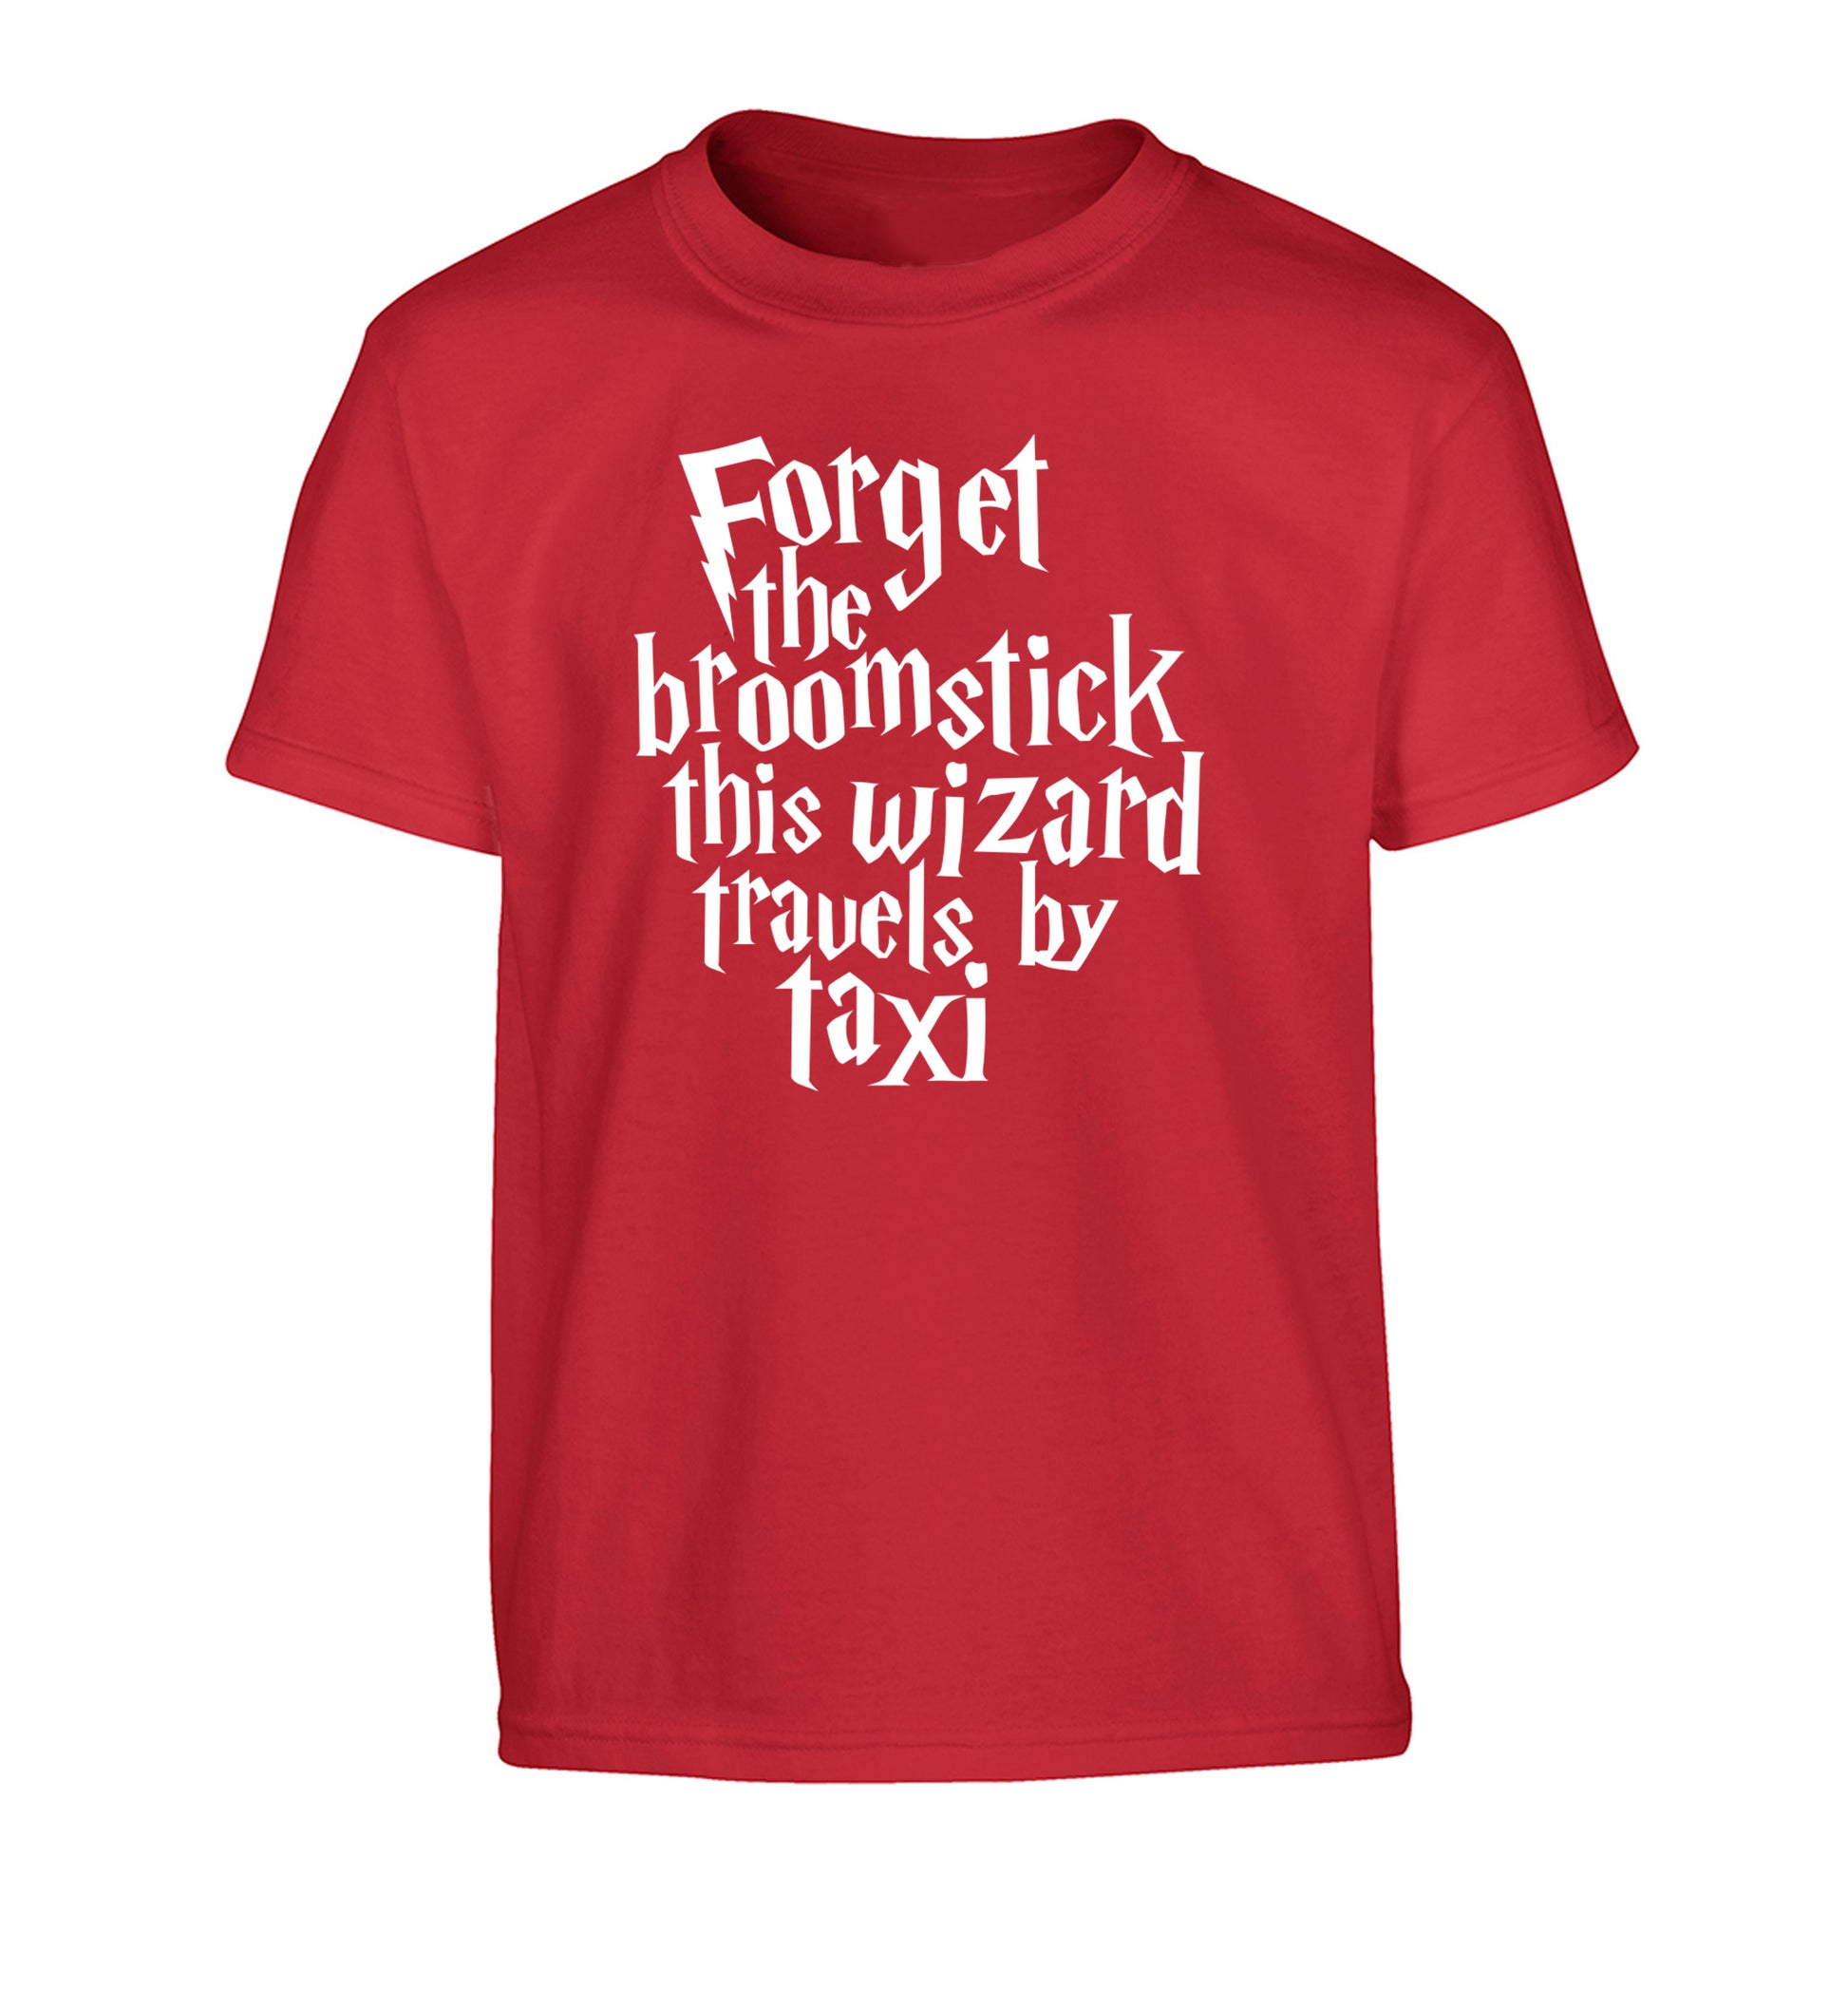 Forget the broomstick this wizard travels by taxi Children's red Tshirt 12-14 Years